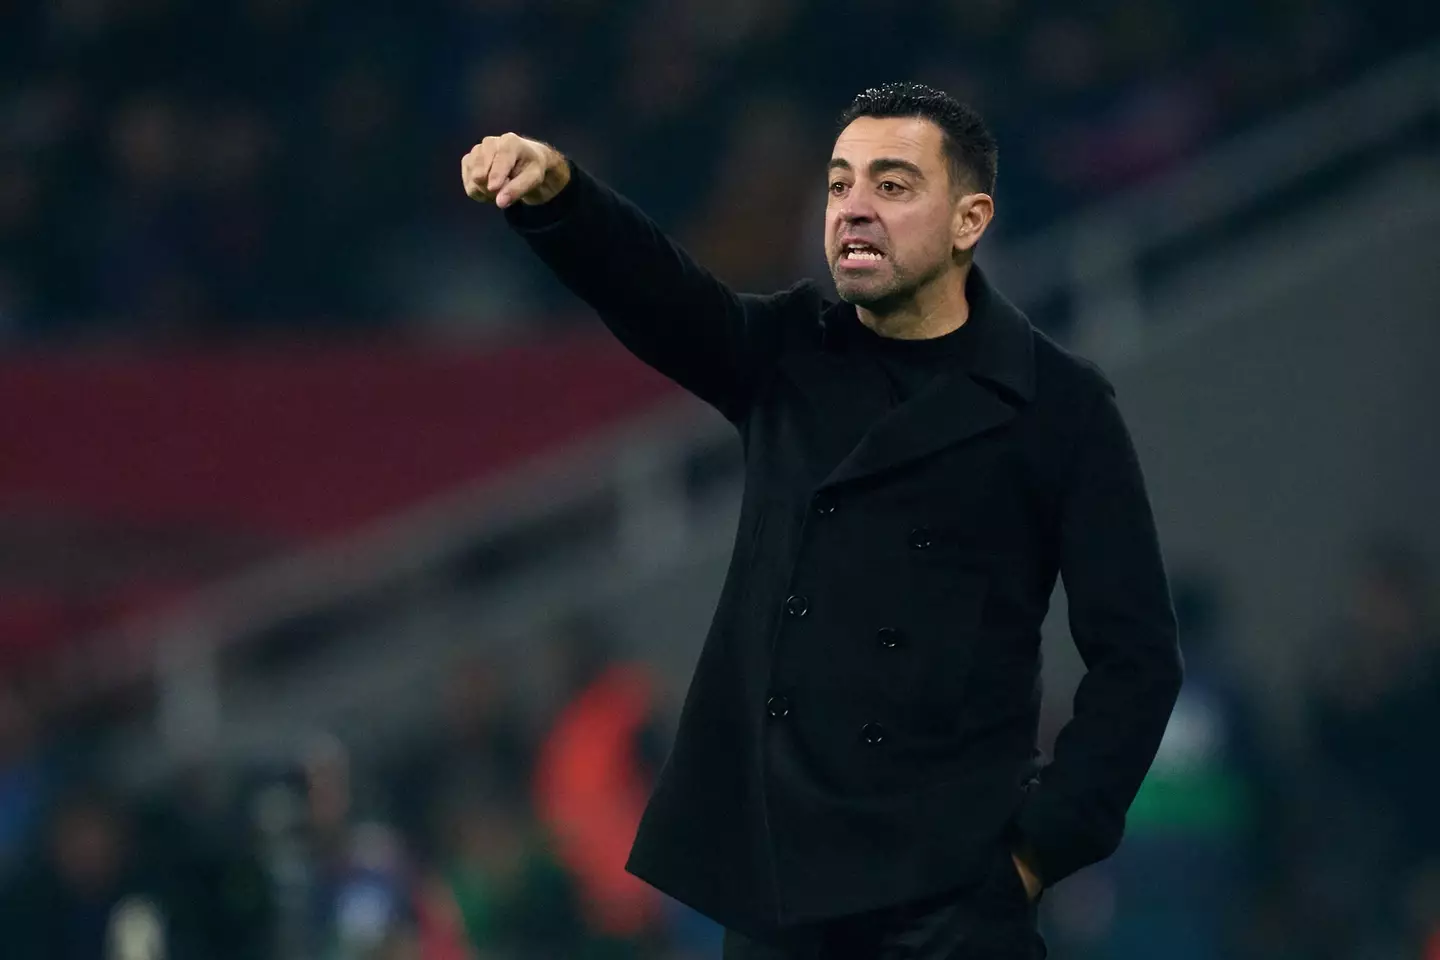 Xavi on the touchline during Barcelona's game against Villarreal. Image: Getty